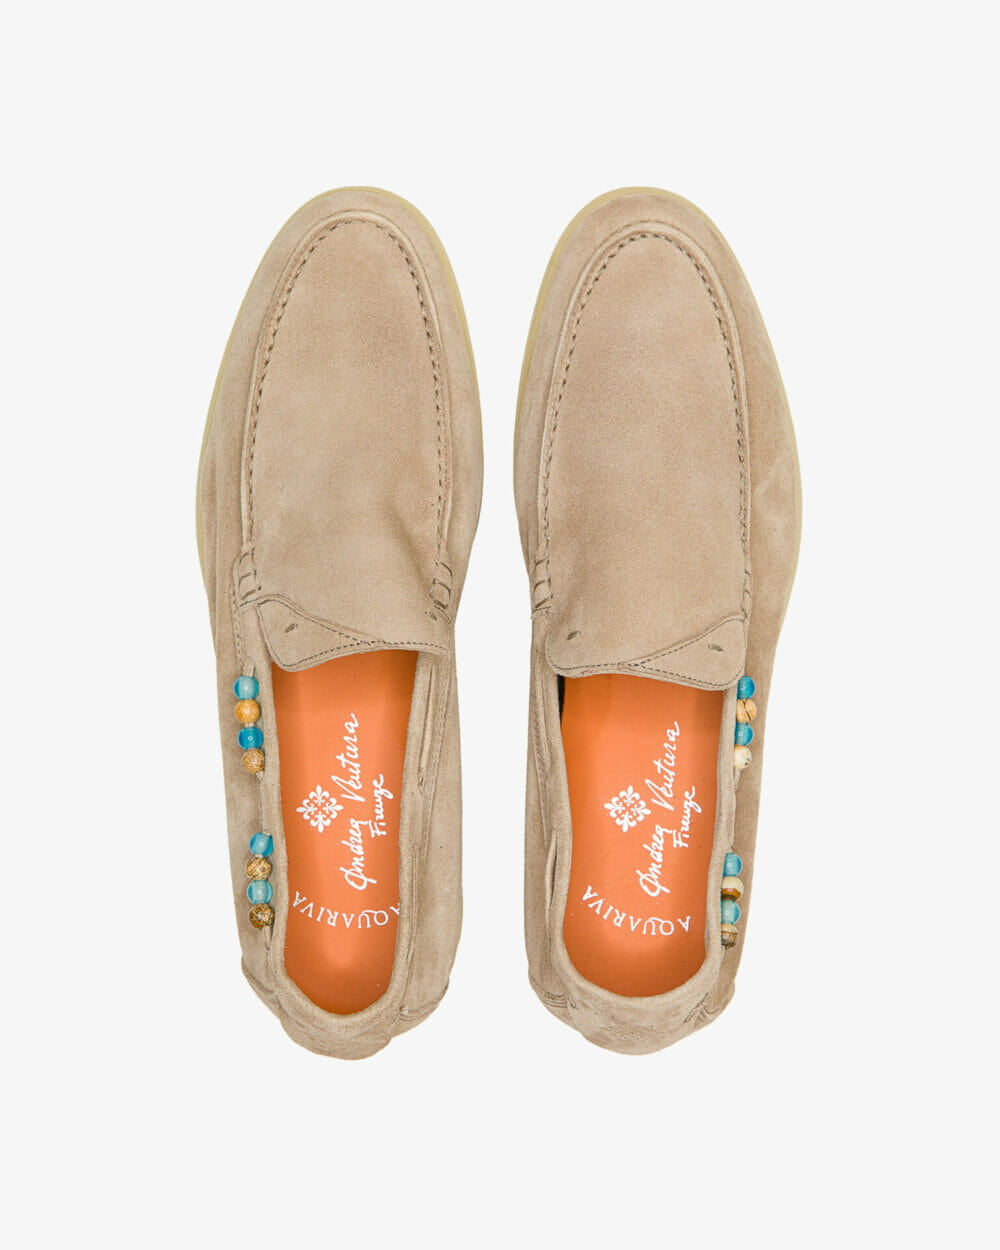 Aquariva-perla-2-park-ave-suede-from-above